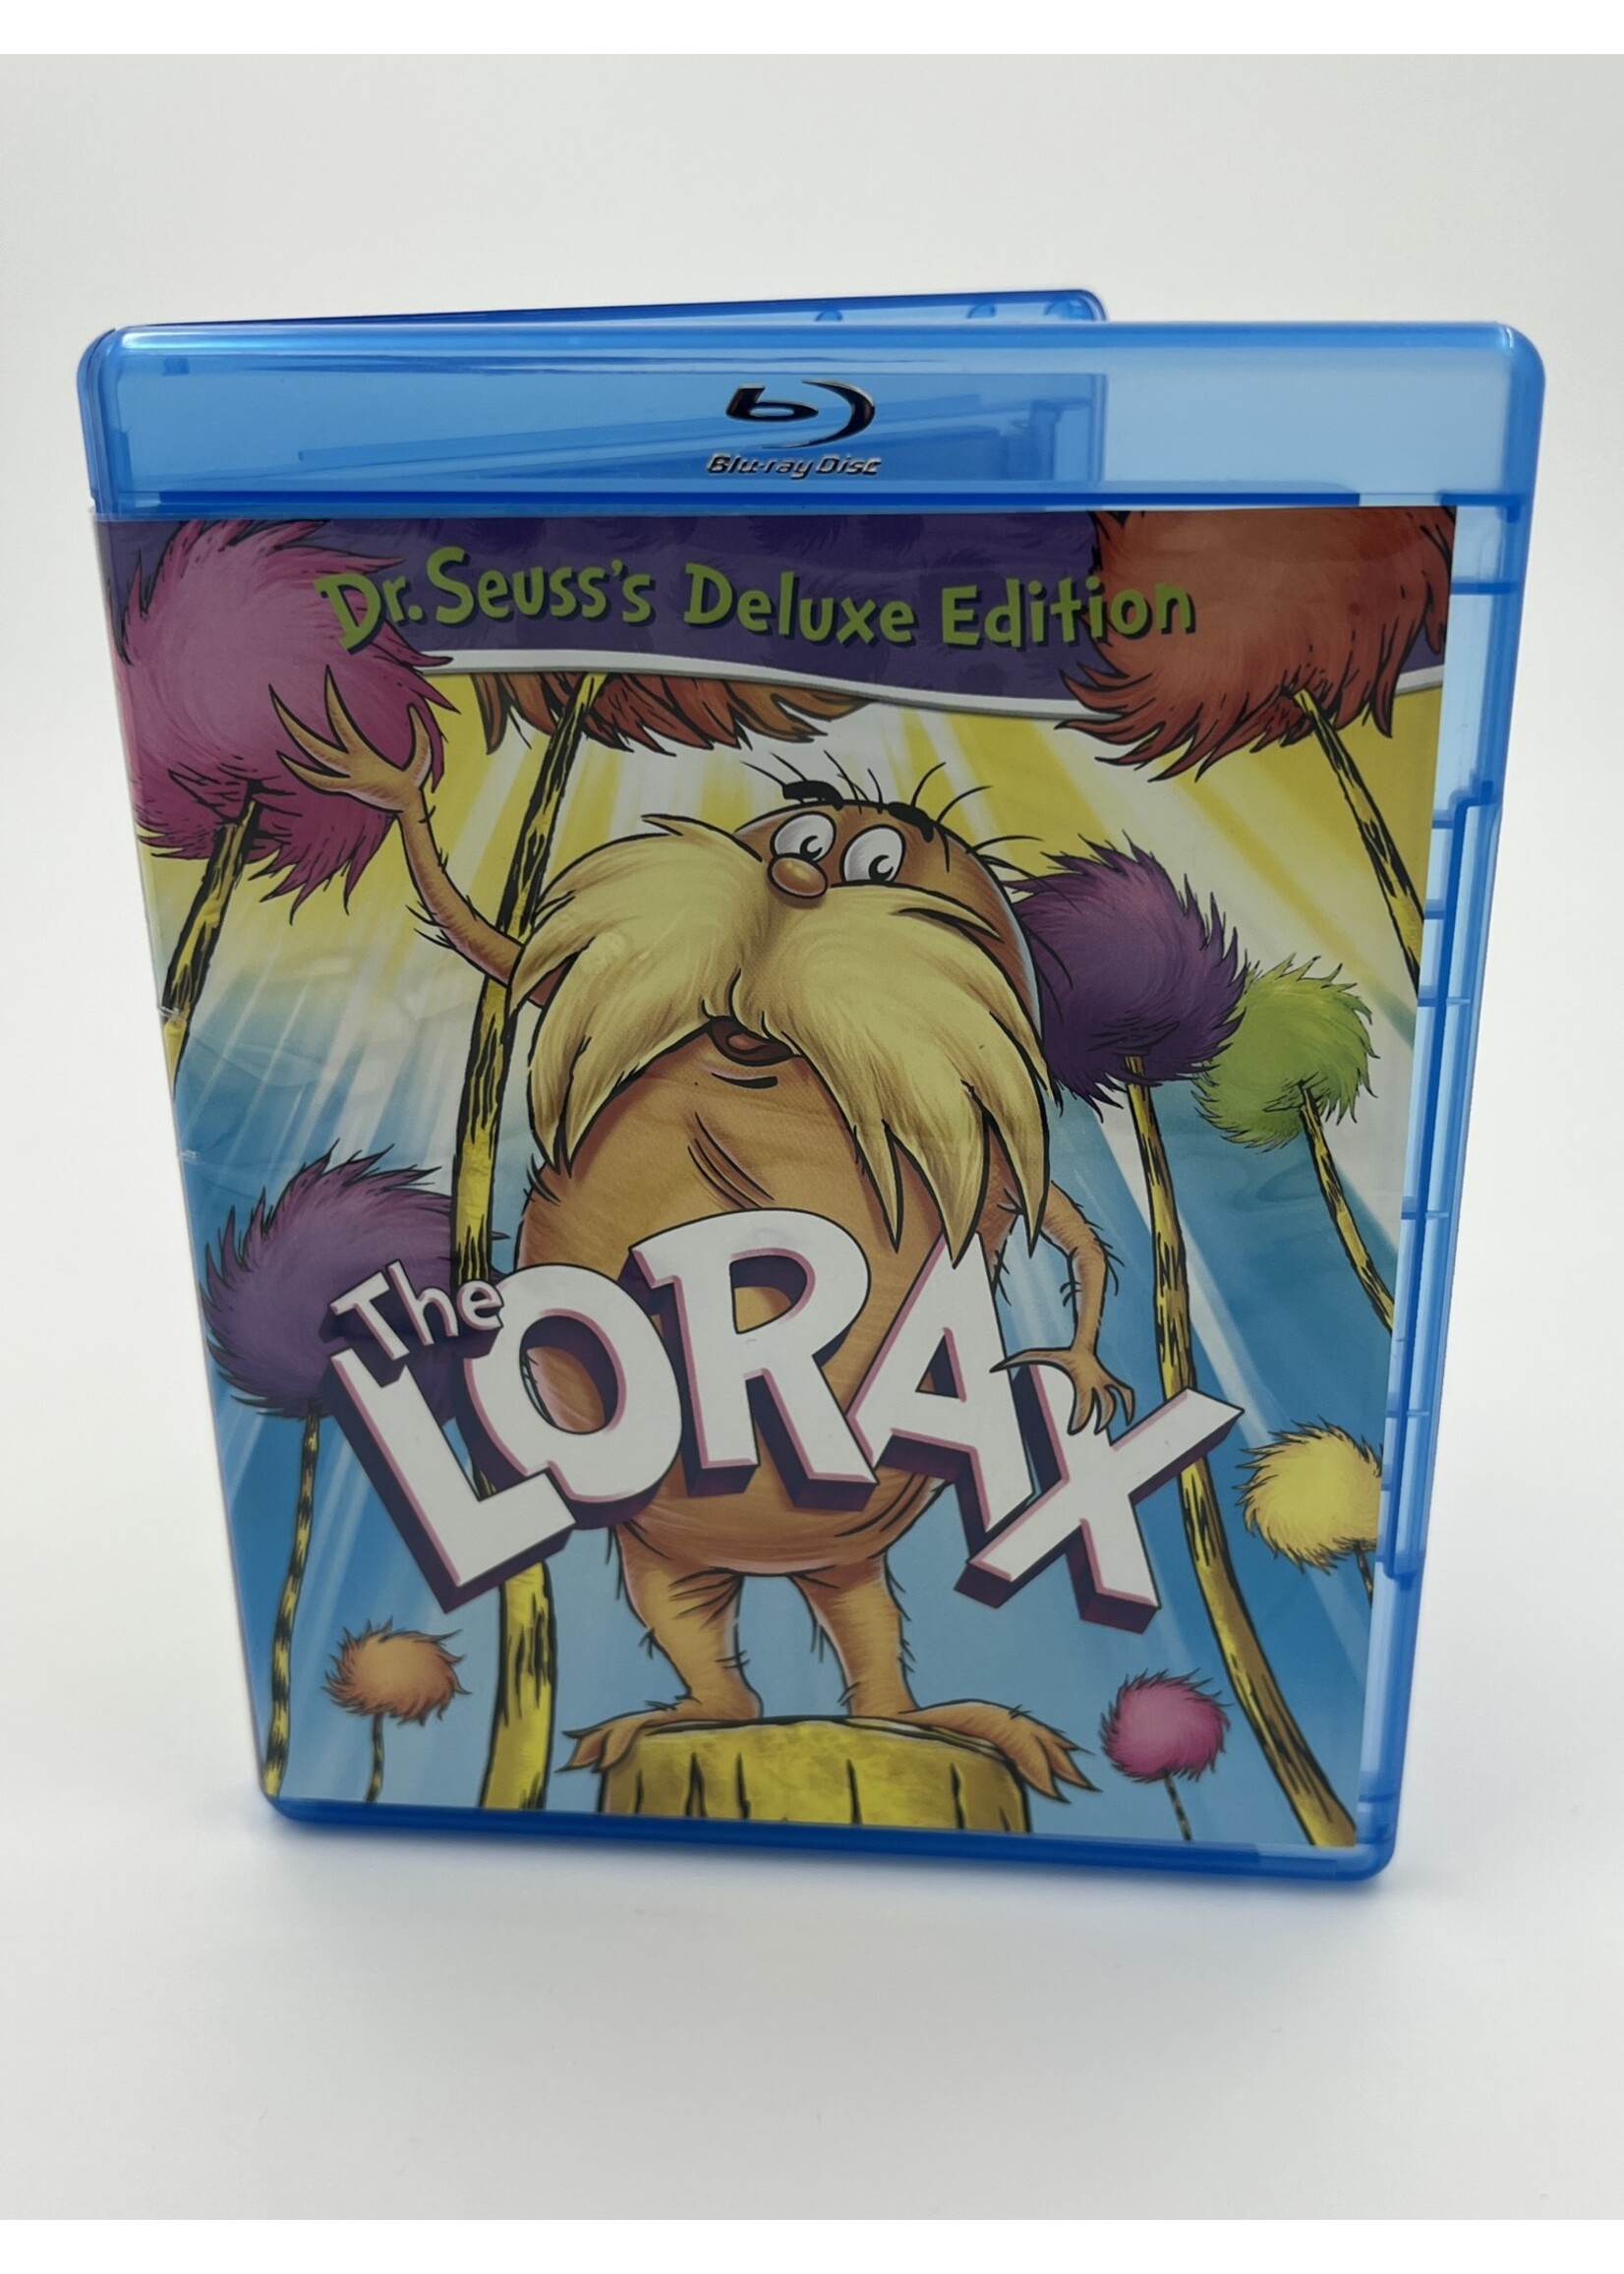 Bluray The Lorax Dr Seusss Deluxe Edition Bluray